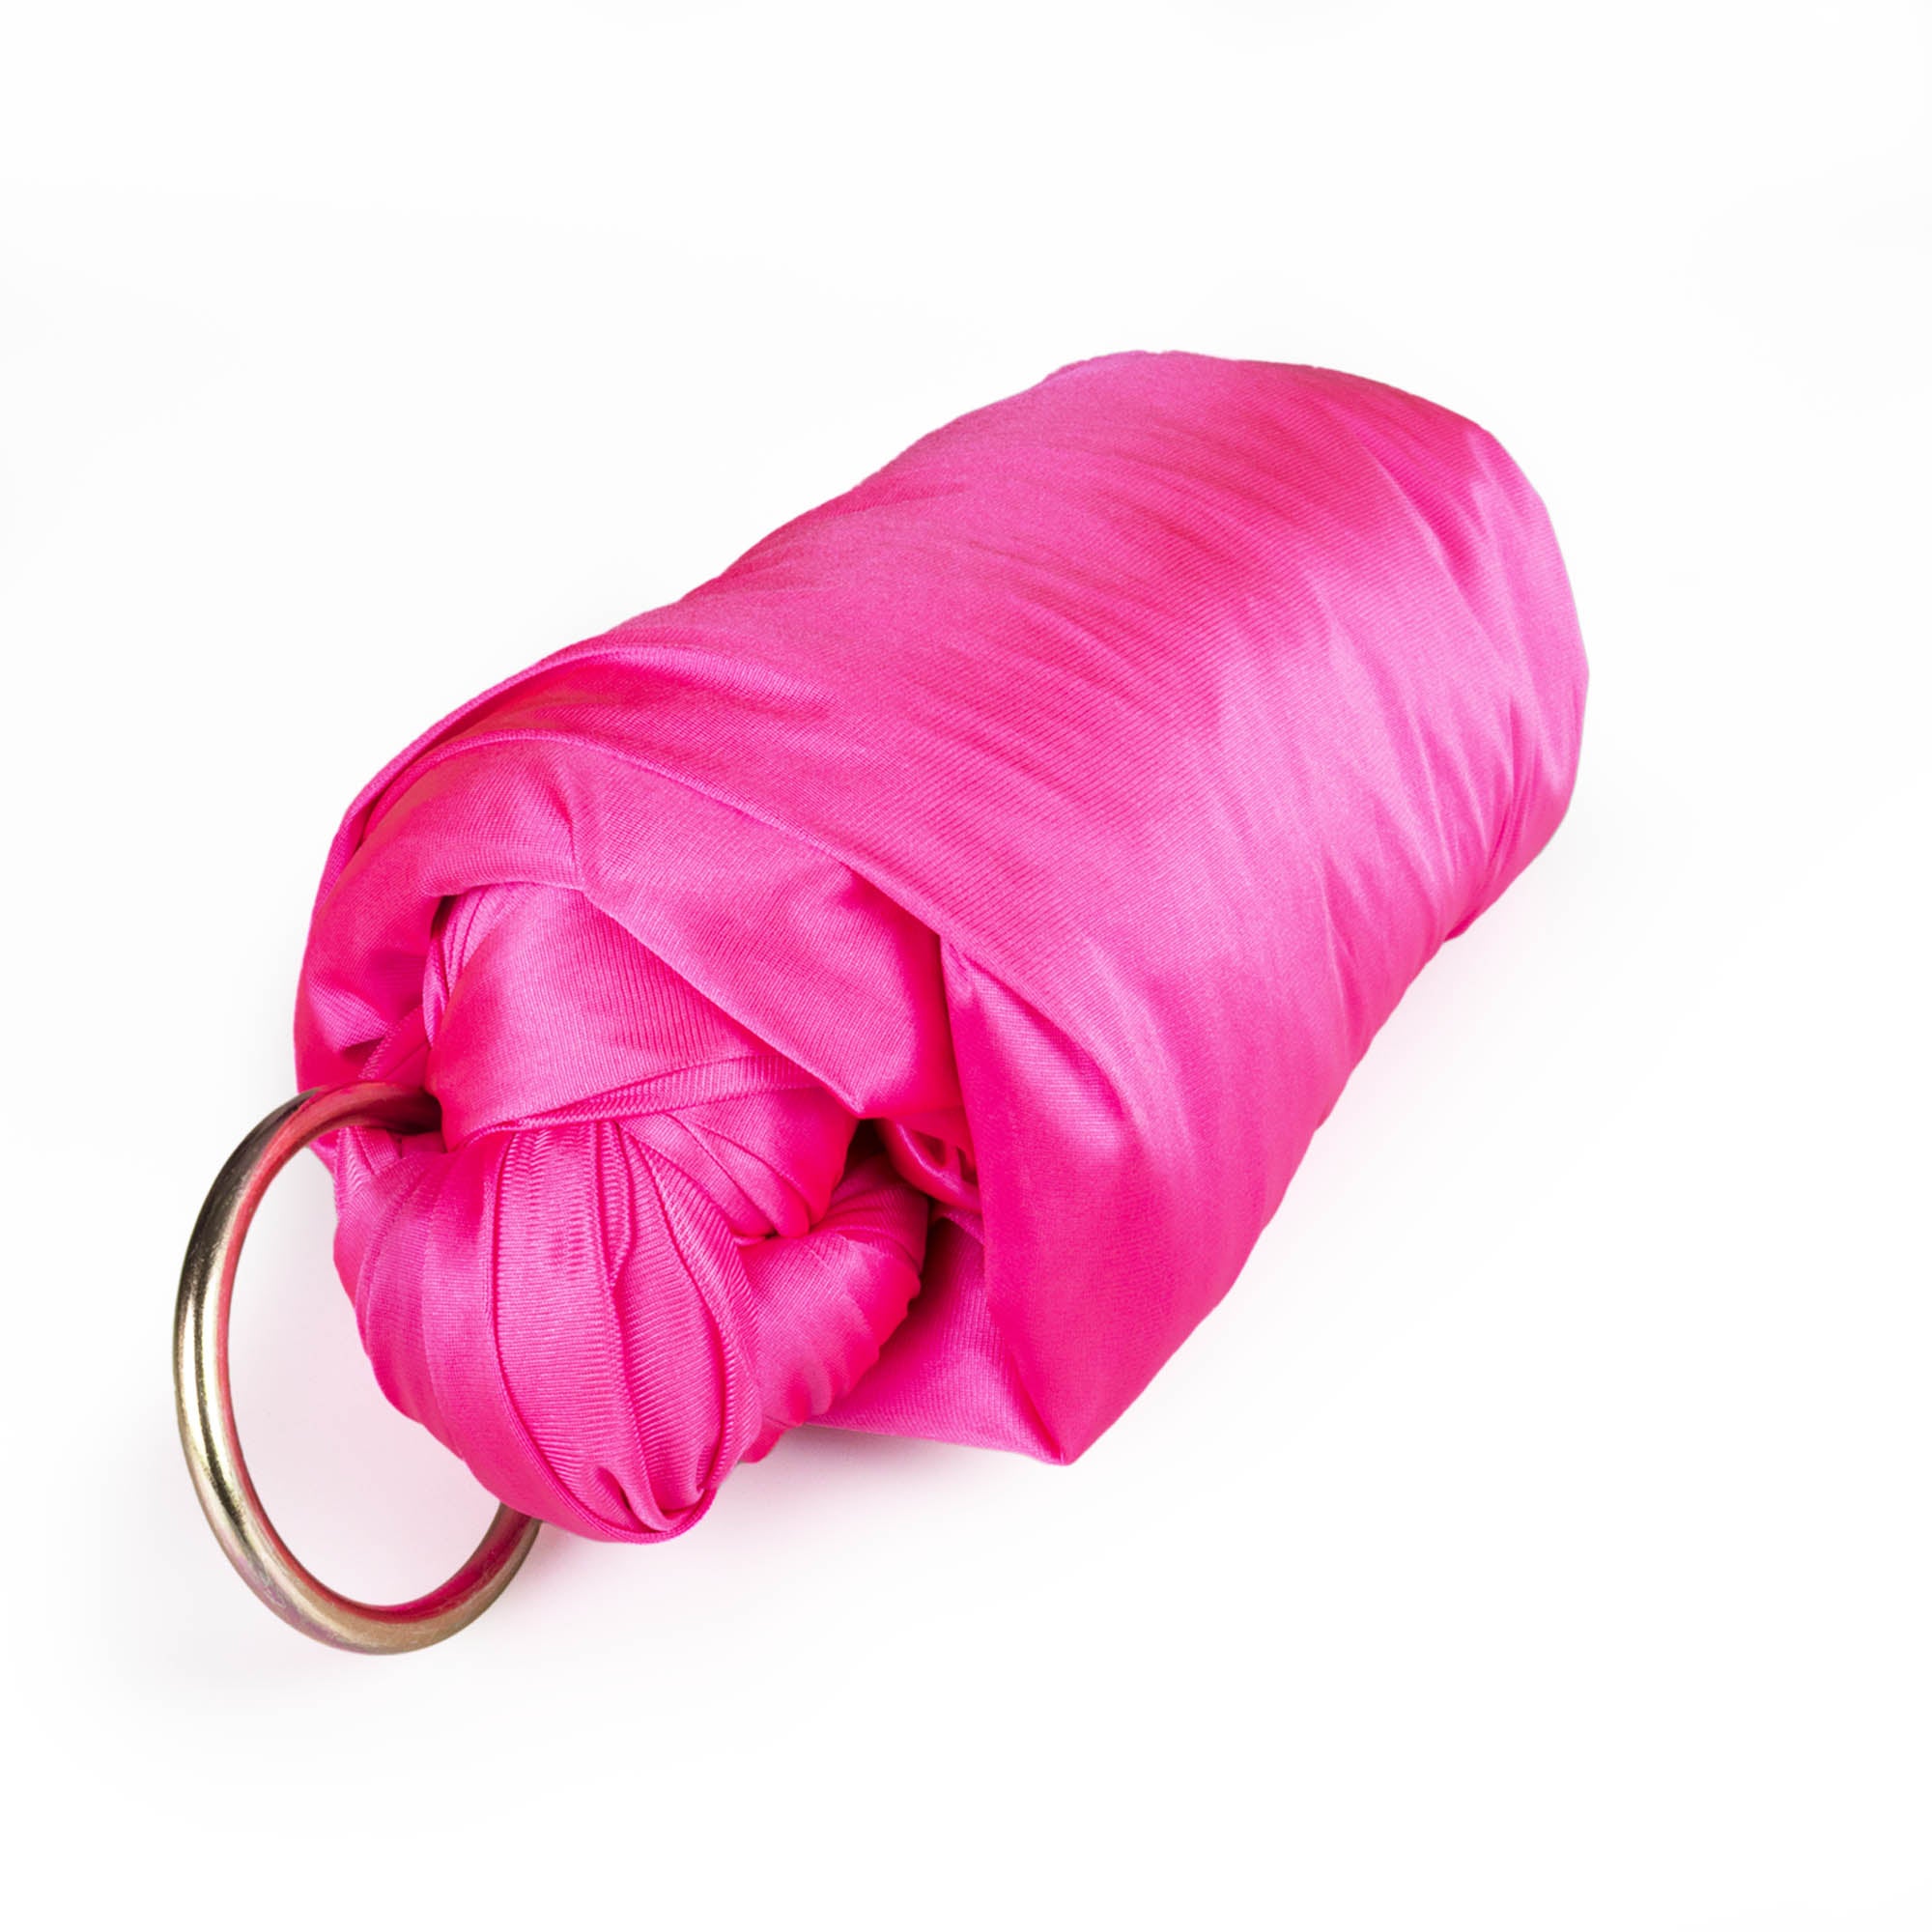 Pink yoga hammock with O rings attached